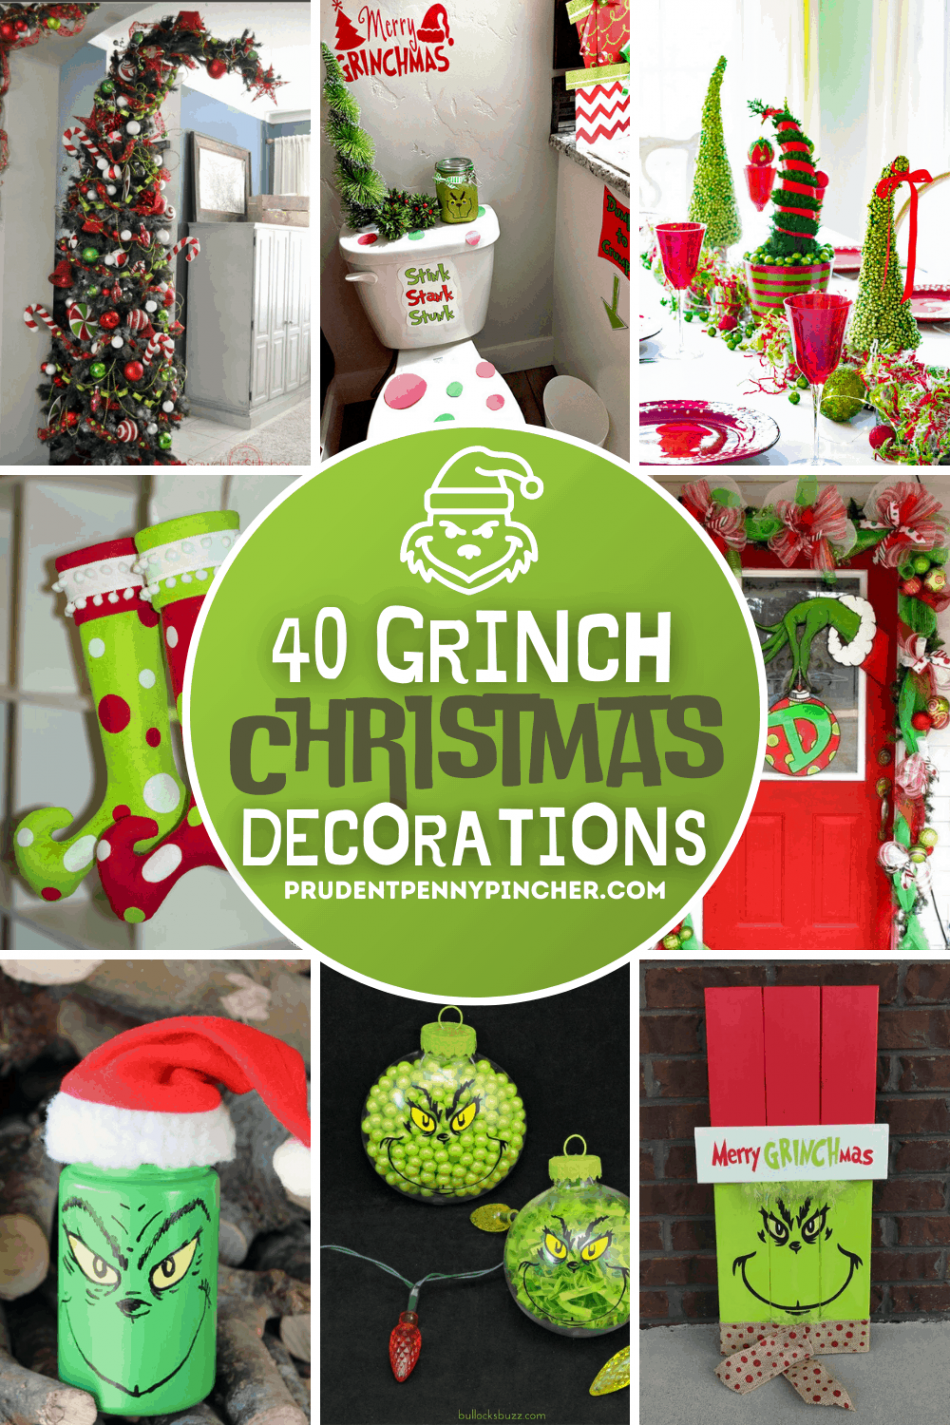 DIY Grinch Christmas Decorations - Prudent Penny Pincher